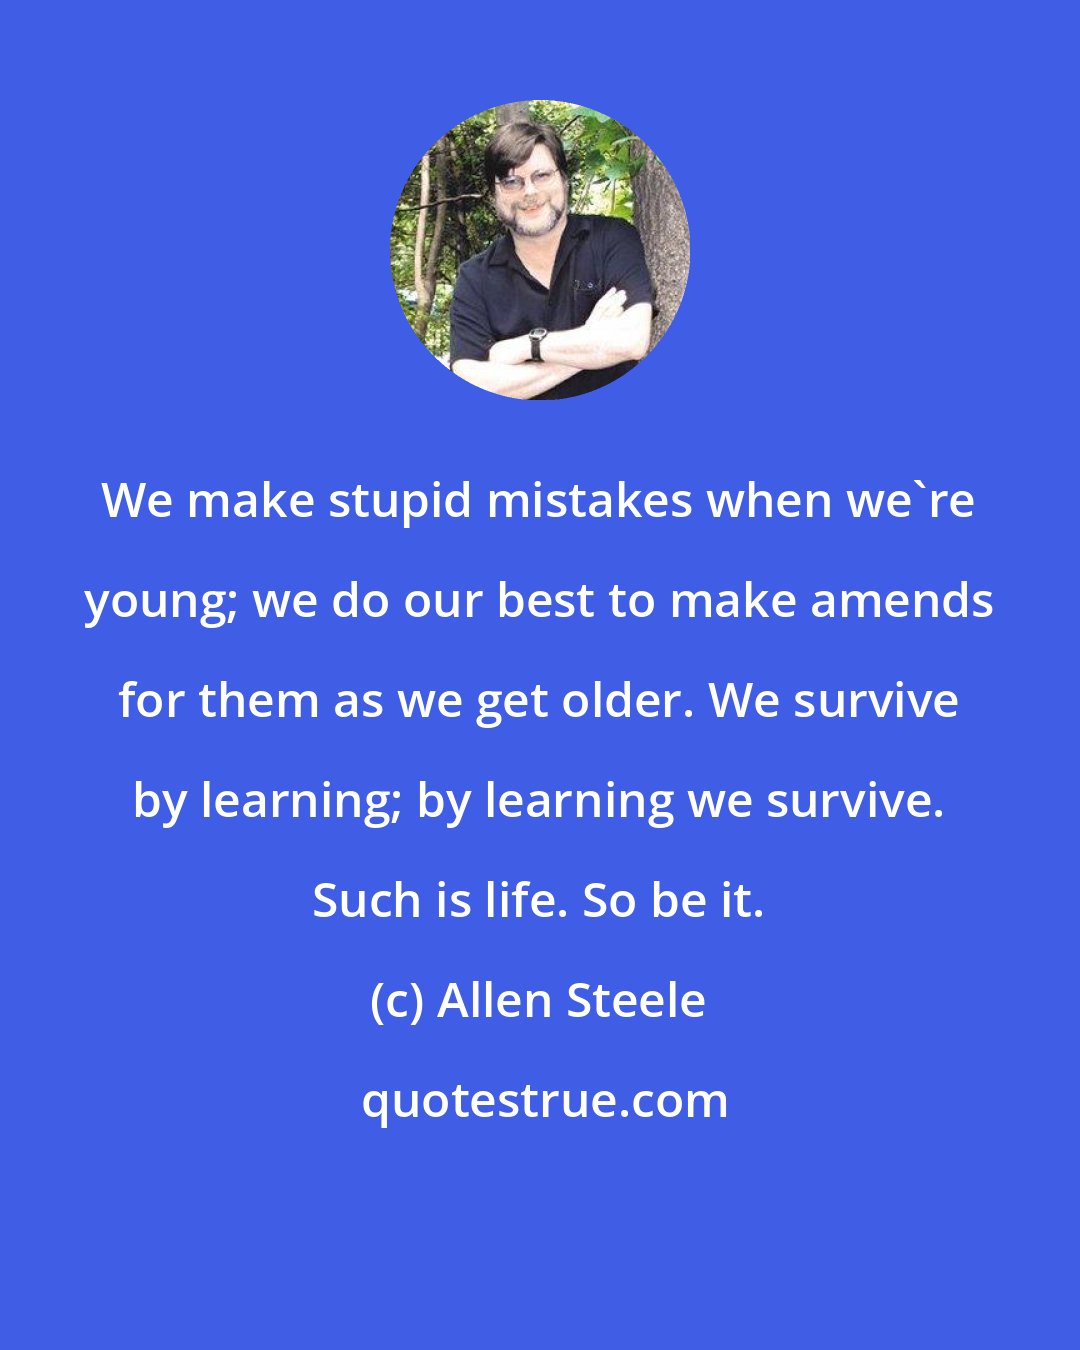 Allen Steele: We make stupid mistakes when we're young; we do our best to make amends for them as we get older. We survive by learning; by learning we survive. Such is life. So be it.